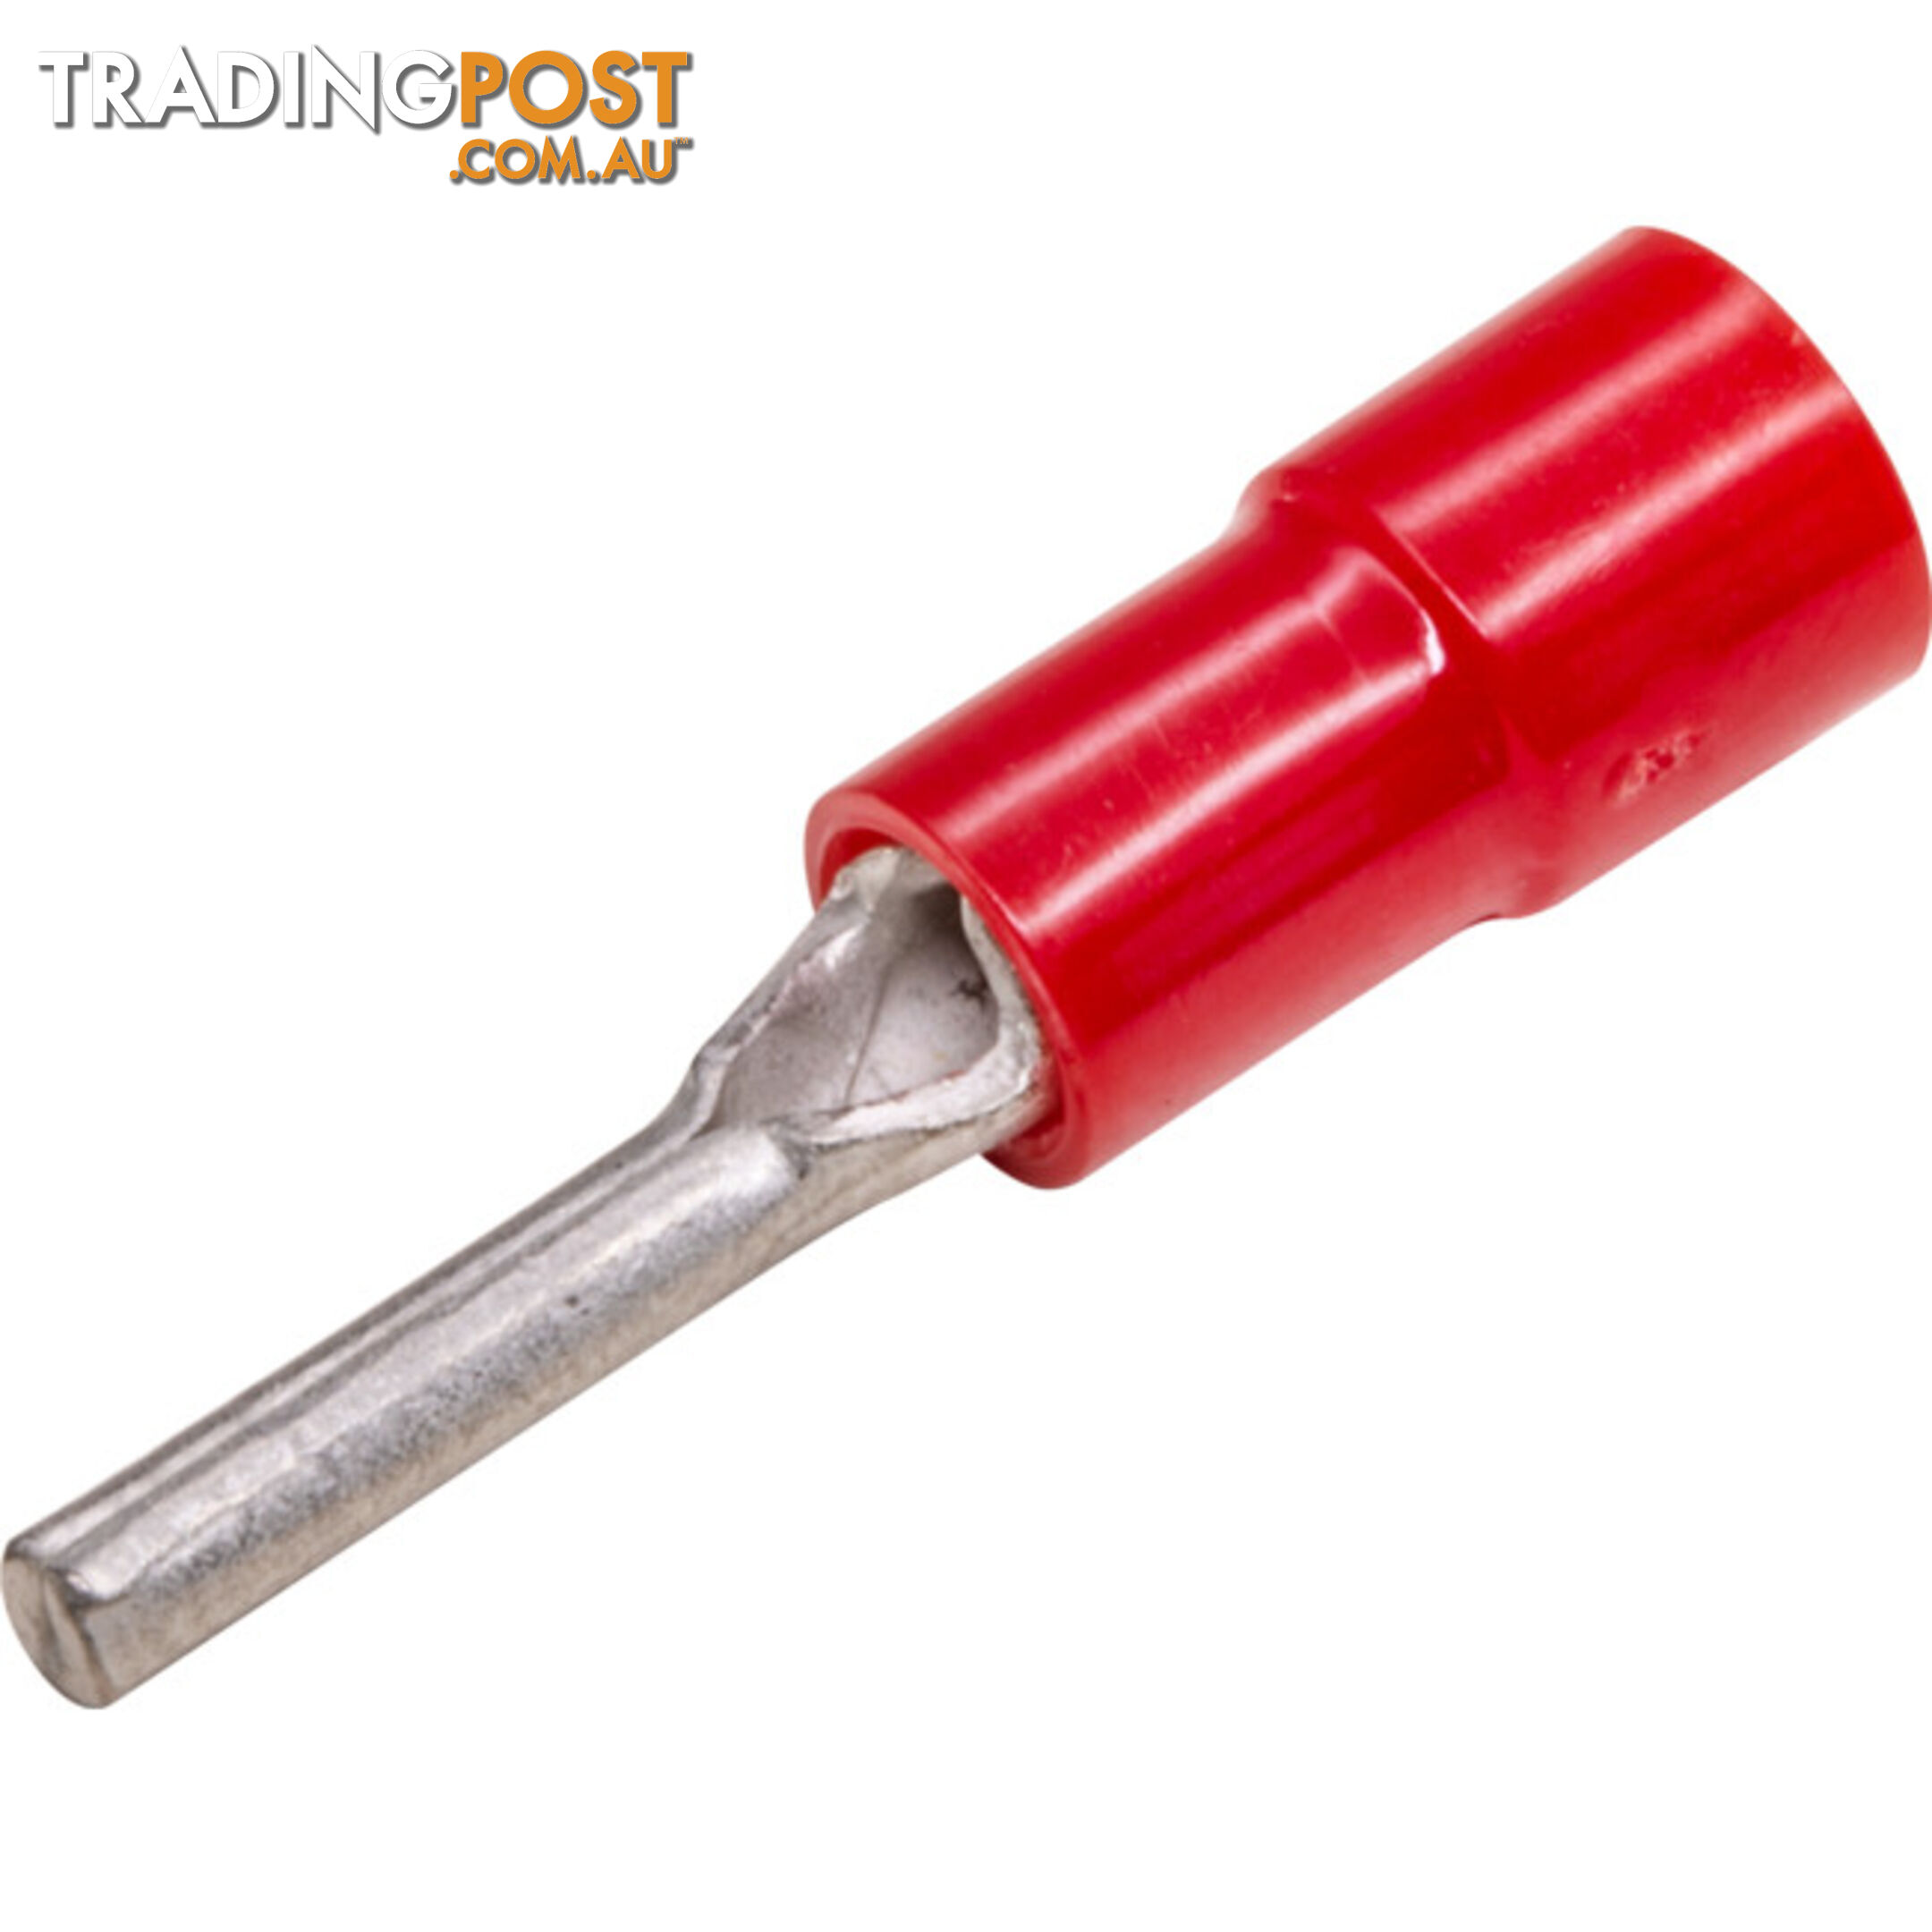 PC1.25-100 PIN CONNECTORS RED 100PK WIRE RANGE 0.5 - 1.6MM SQUARED